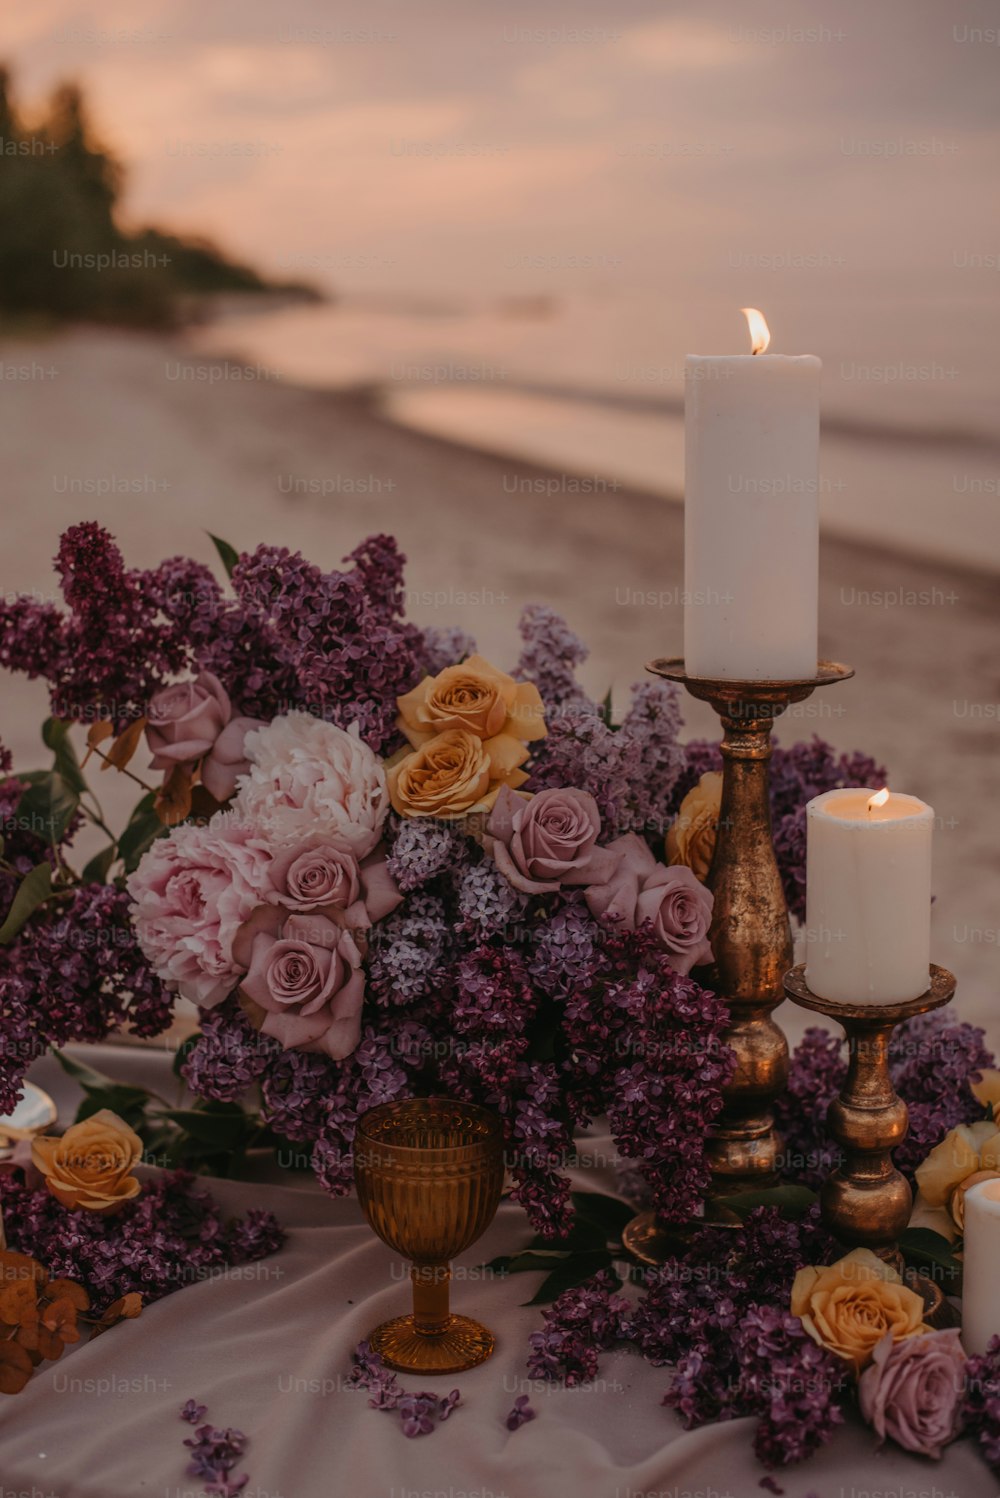 a table topped with a vase filled with flowers and a candle